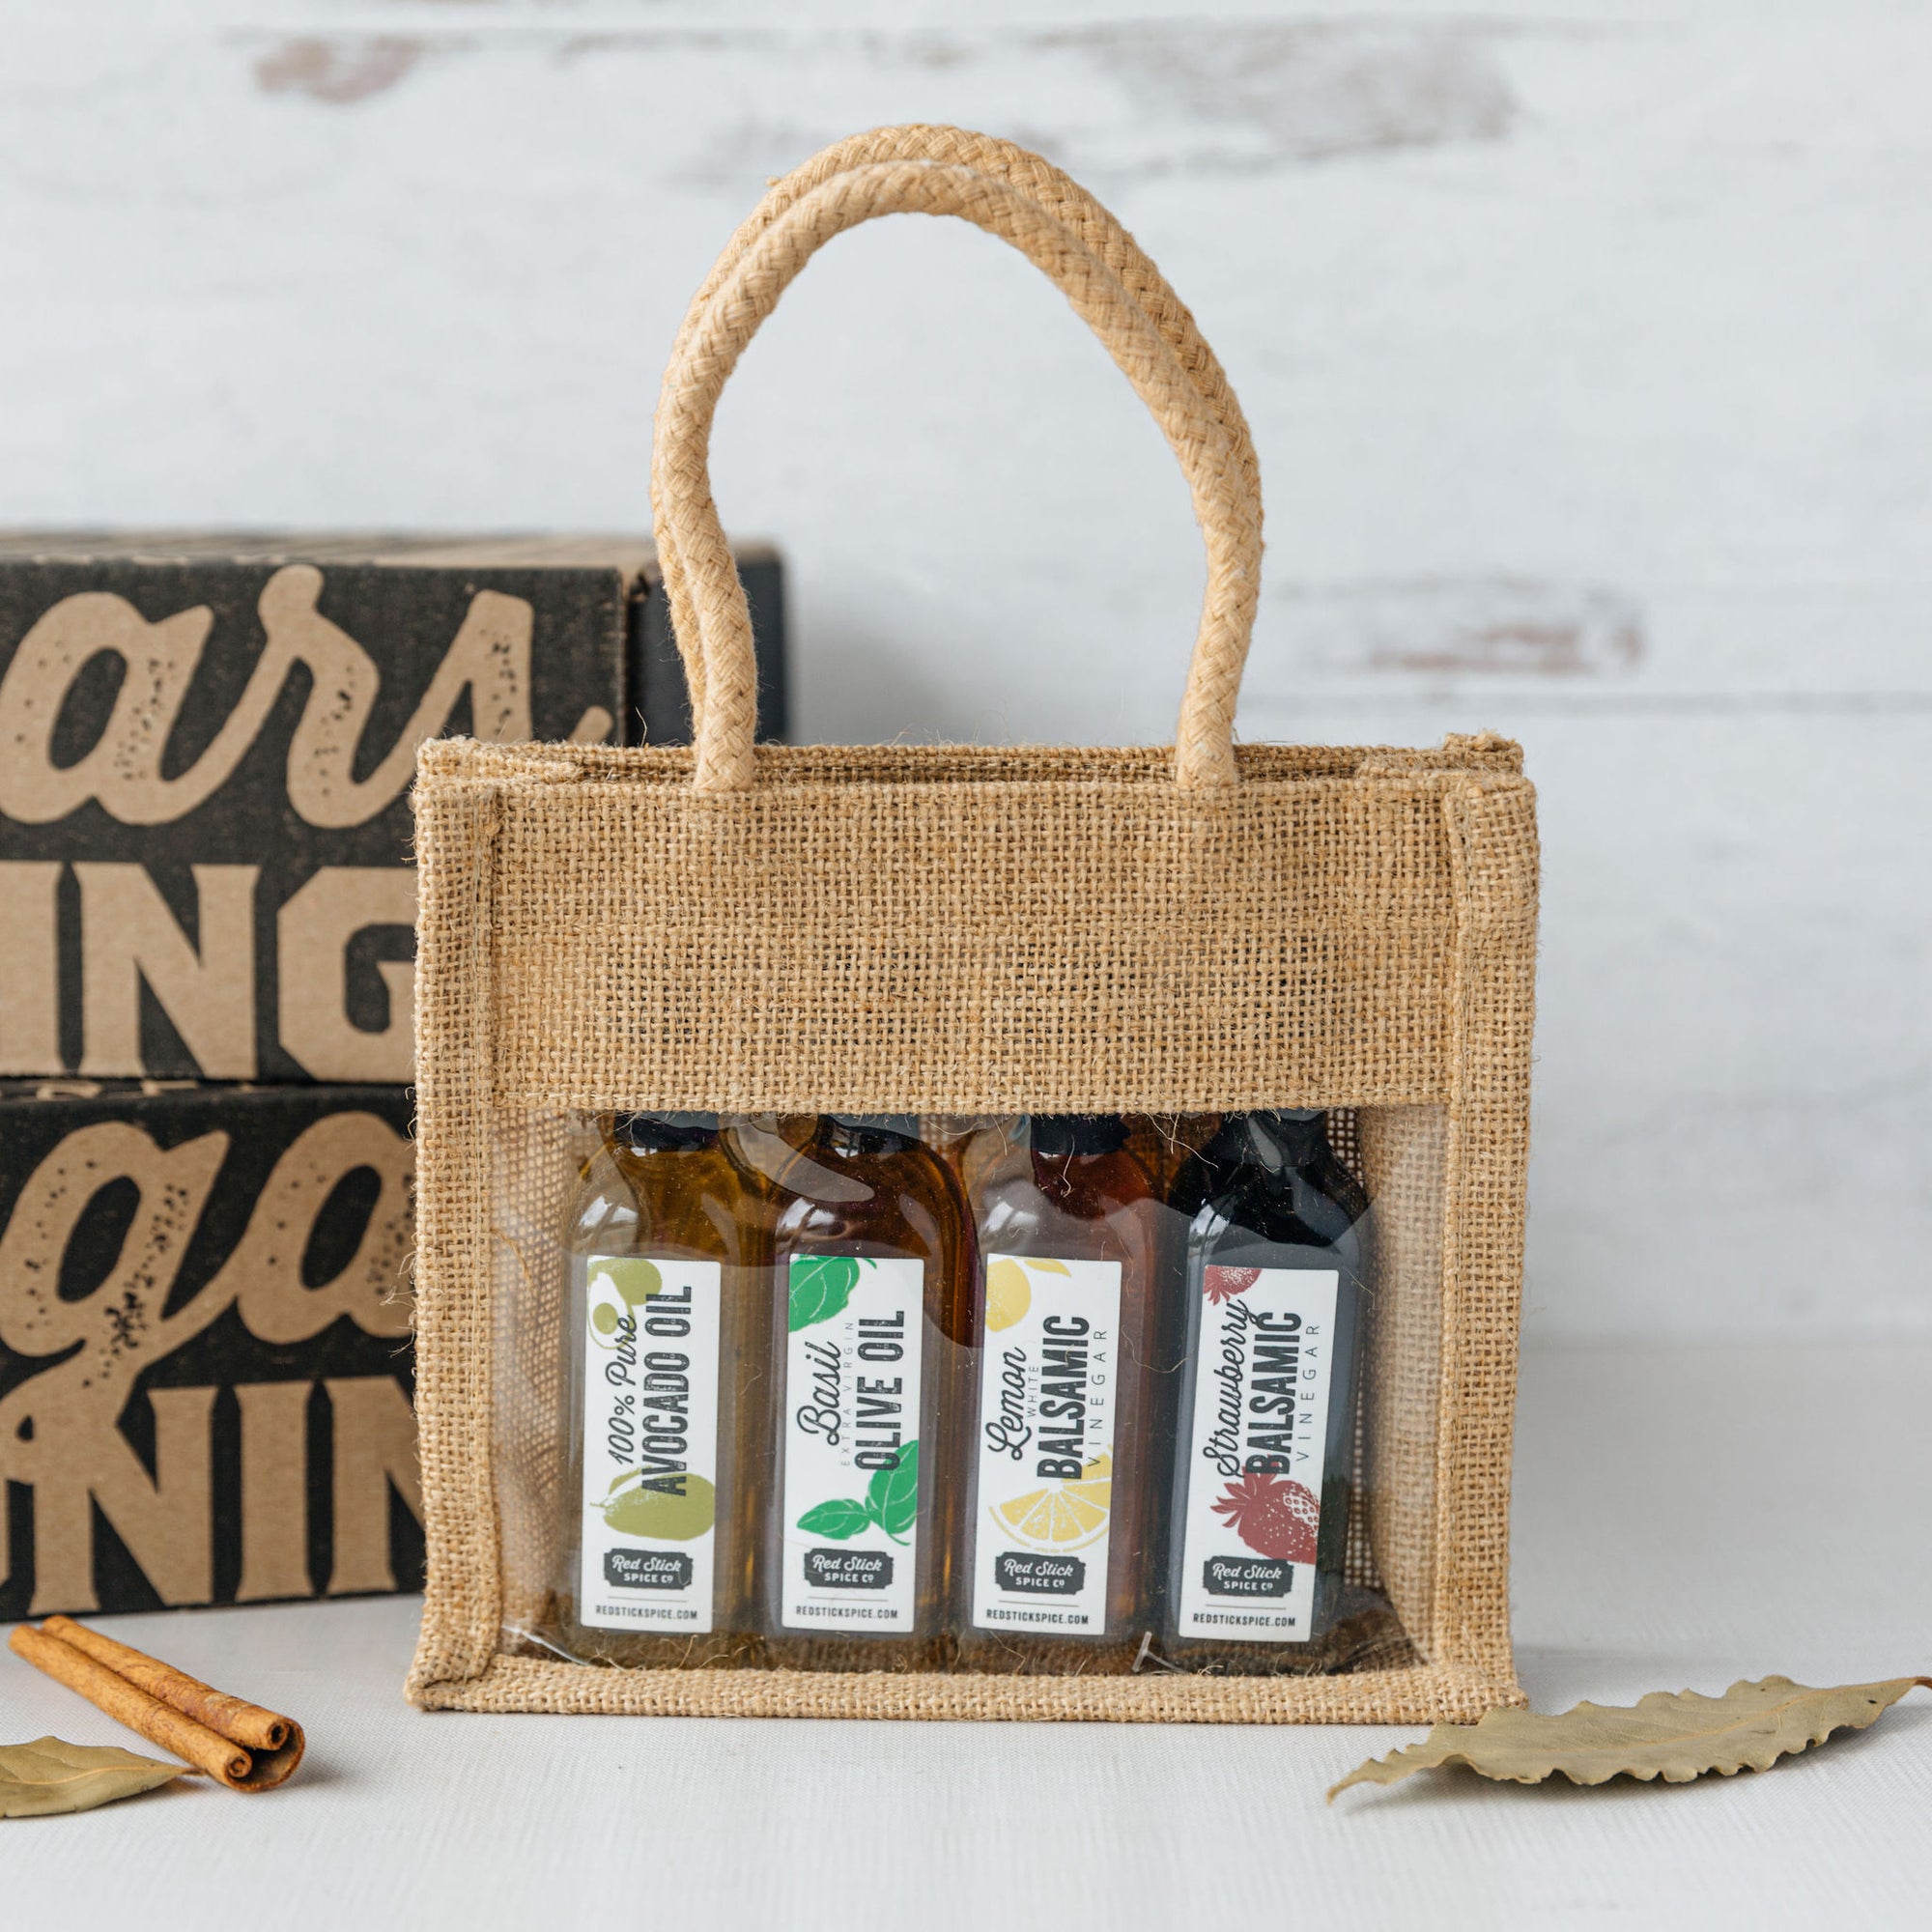 Corporate Gifts: 4 Bottle Mini Gift Sets